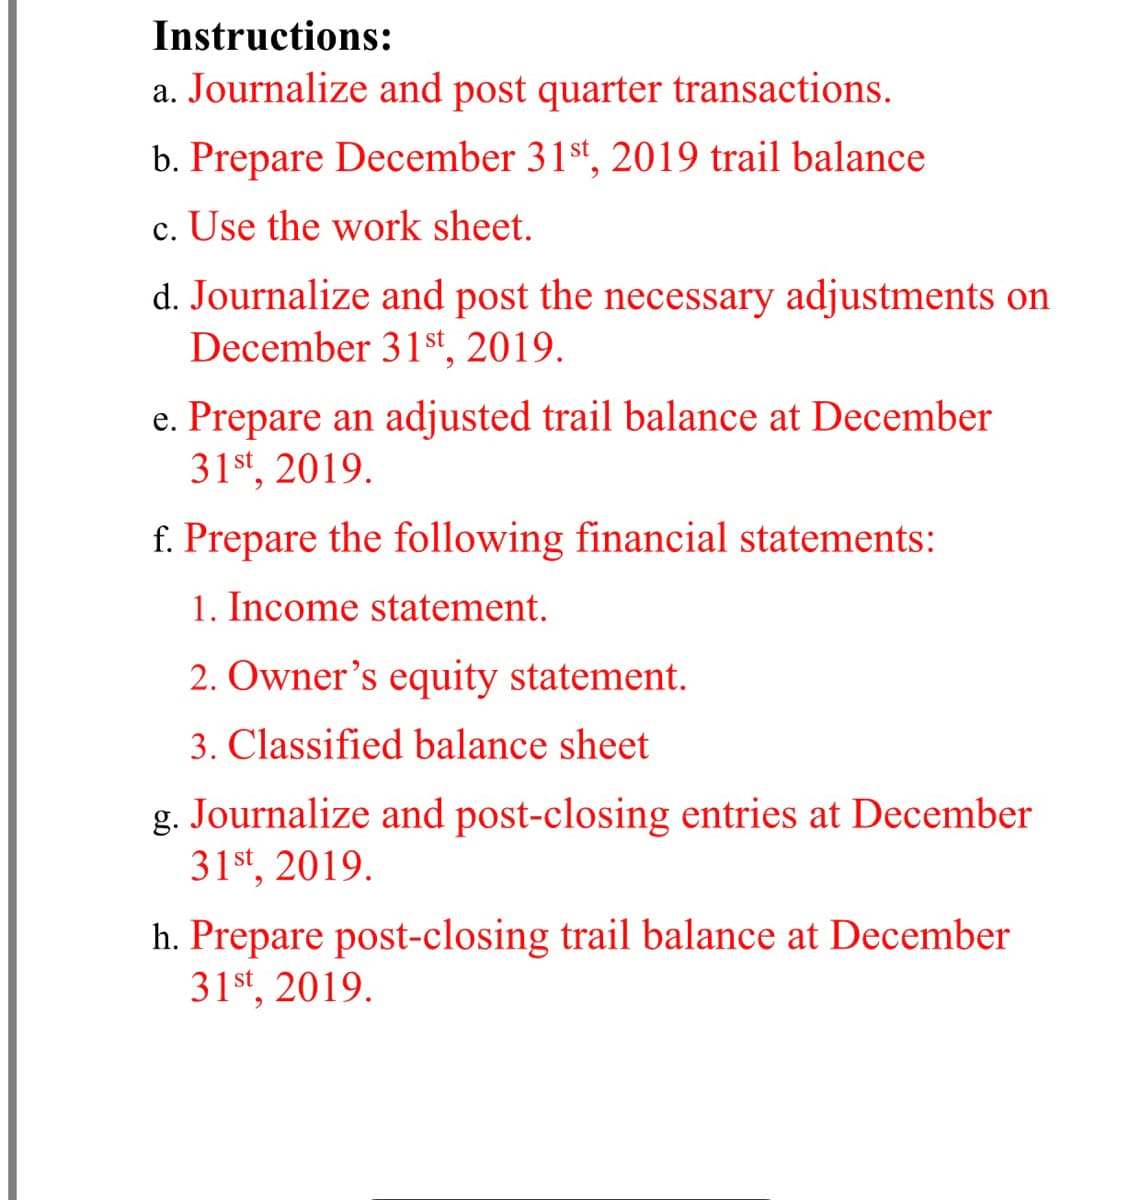 Instructions:
a. Journalize and post quarter transactions.
b. Prepare December 31st, 2019 trail balance
c. Use the work sheet.
d. Journalize and post the necessary adjustments on
December 31 st 2019.
e. Prepare an adjusted trail balance at December
31st, 2019.
f. Prepare the following financial statements:
1. Income statement.
2. Owner's equity statement.
3. Classified balance sheet
g. Journalize and post-closing entries at December
31st, 2019.
h. Prepare post-closing trail balance at December
31st, 2019.
